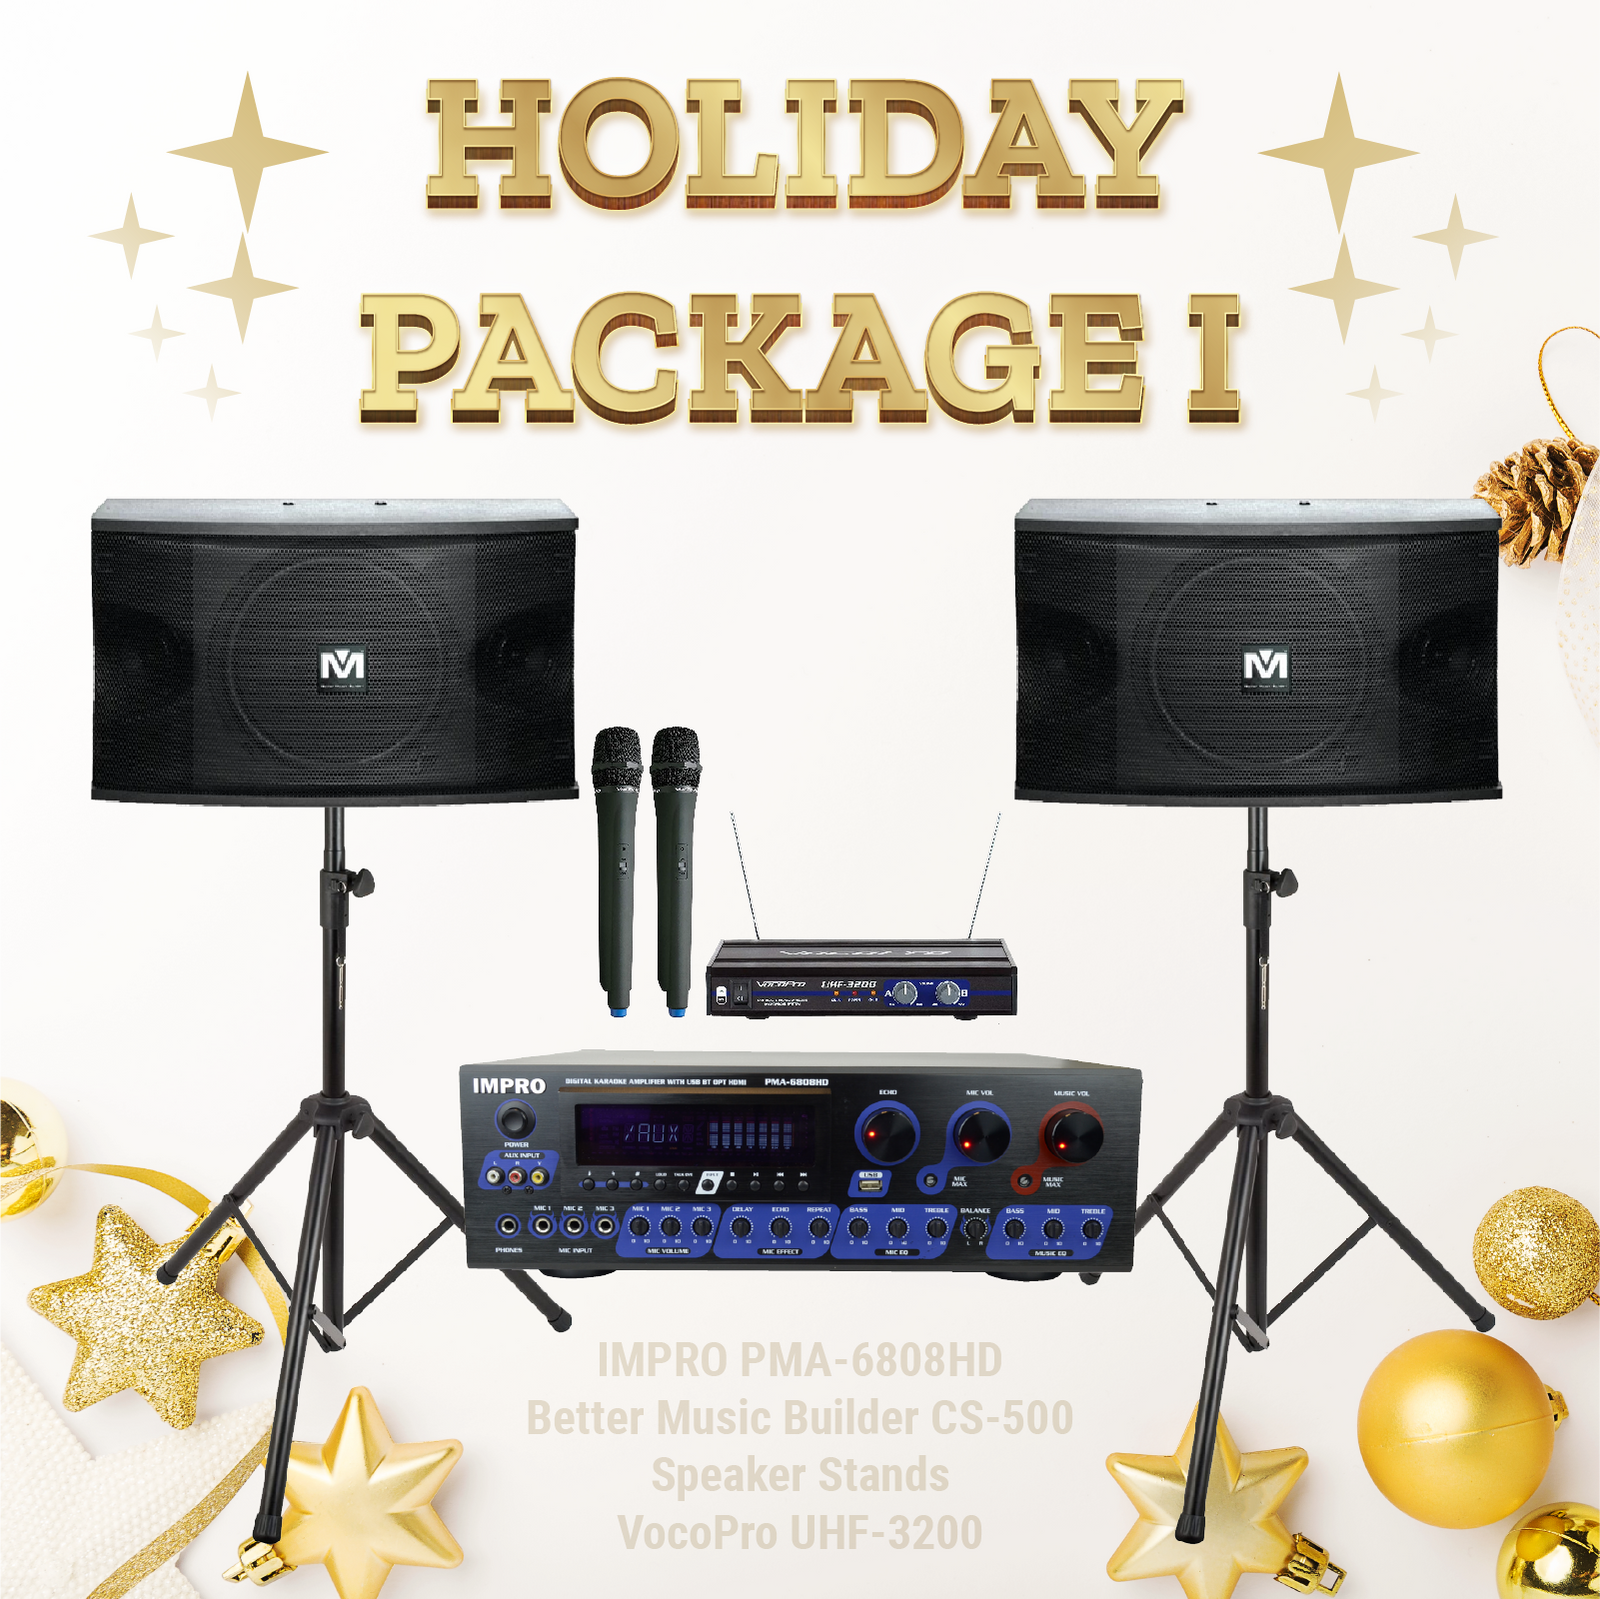 Holiday Package #01: ImPro PMA-6808HD + Stands + BetterMusicBuilder CS-500 + VocoPro Microphone System